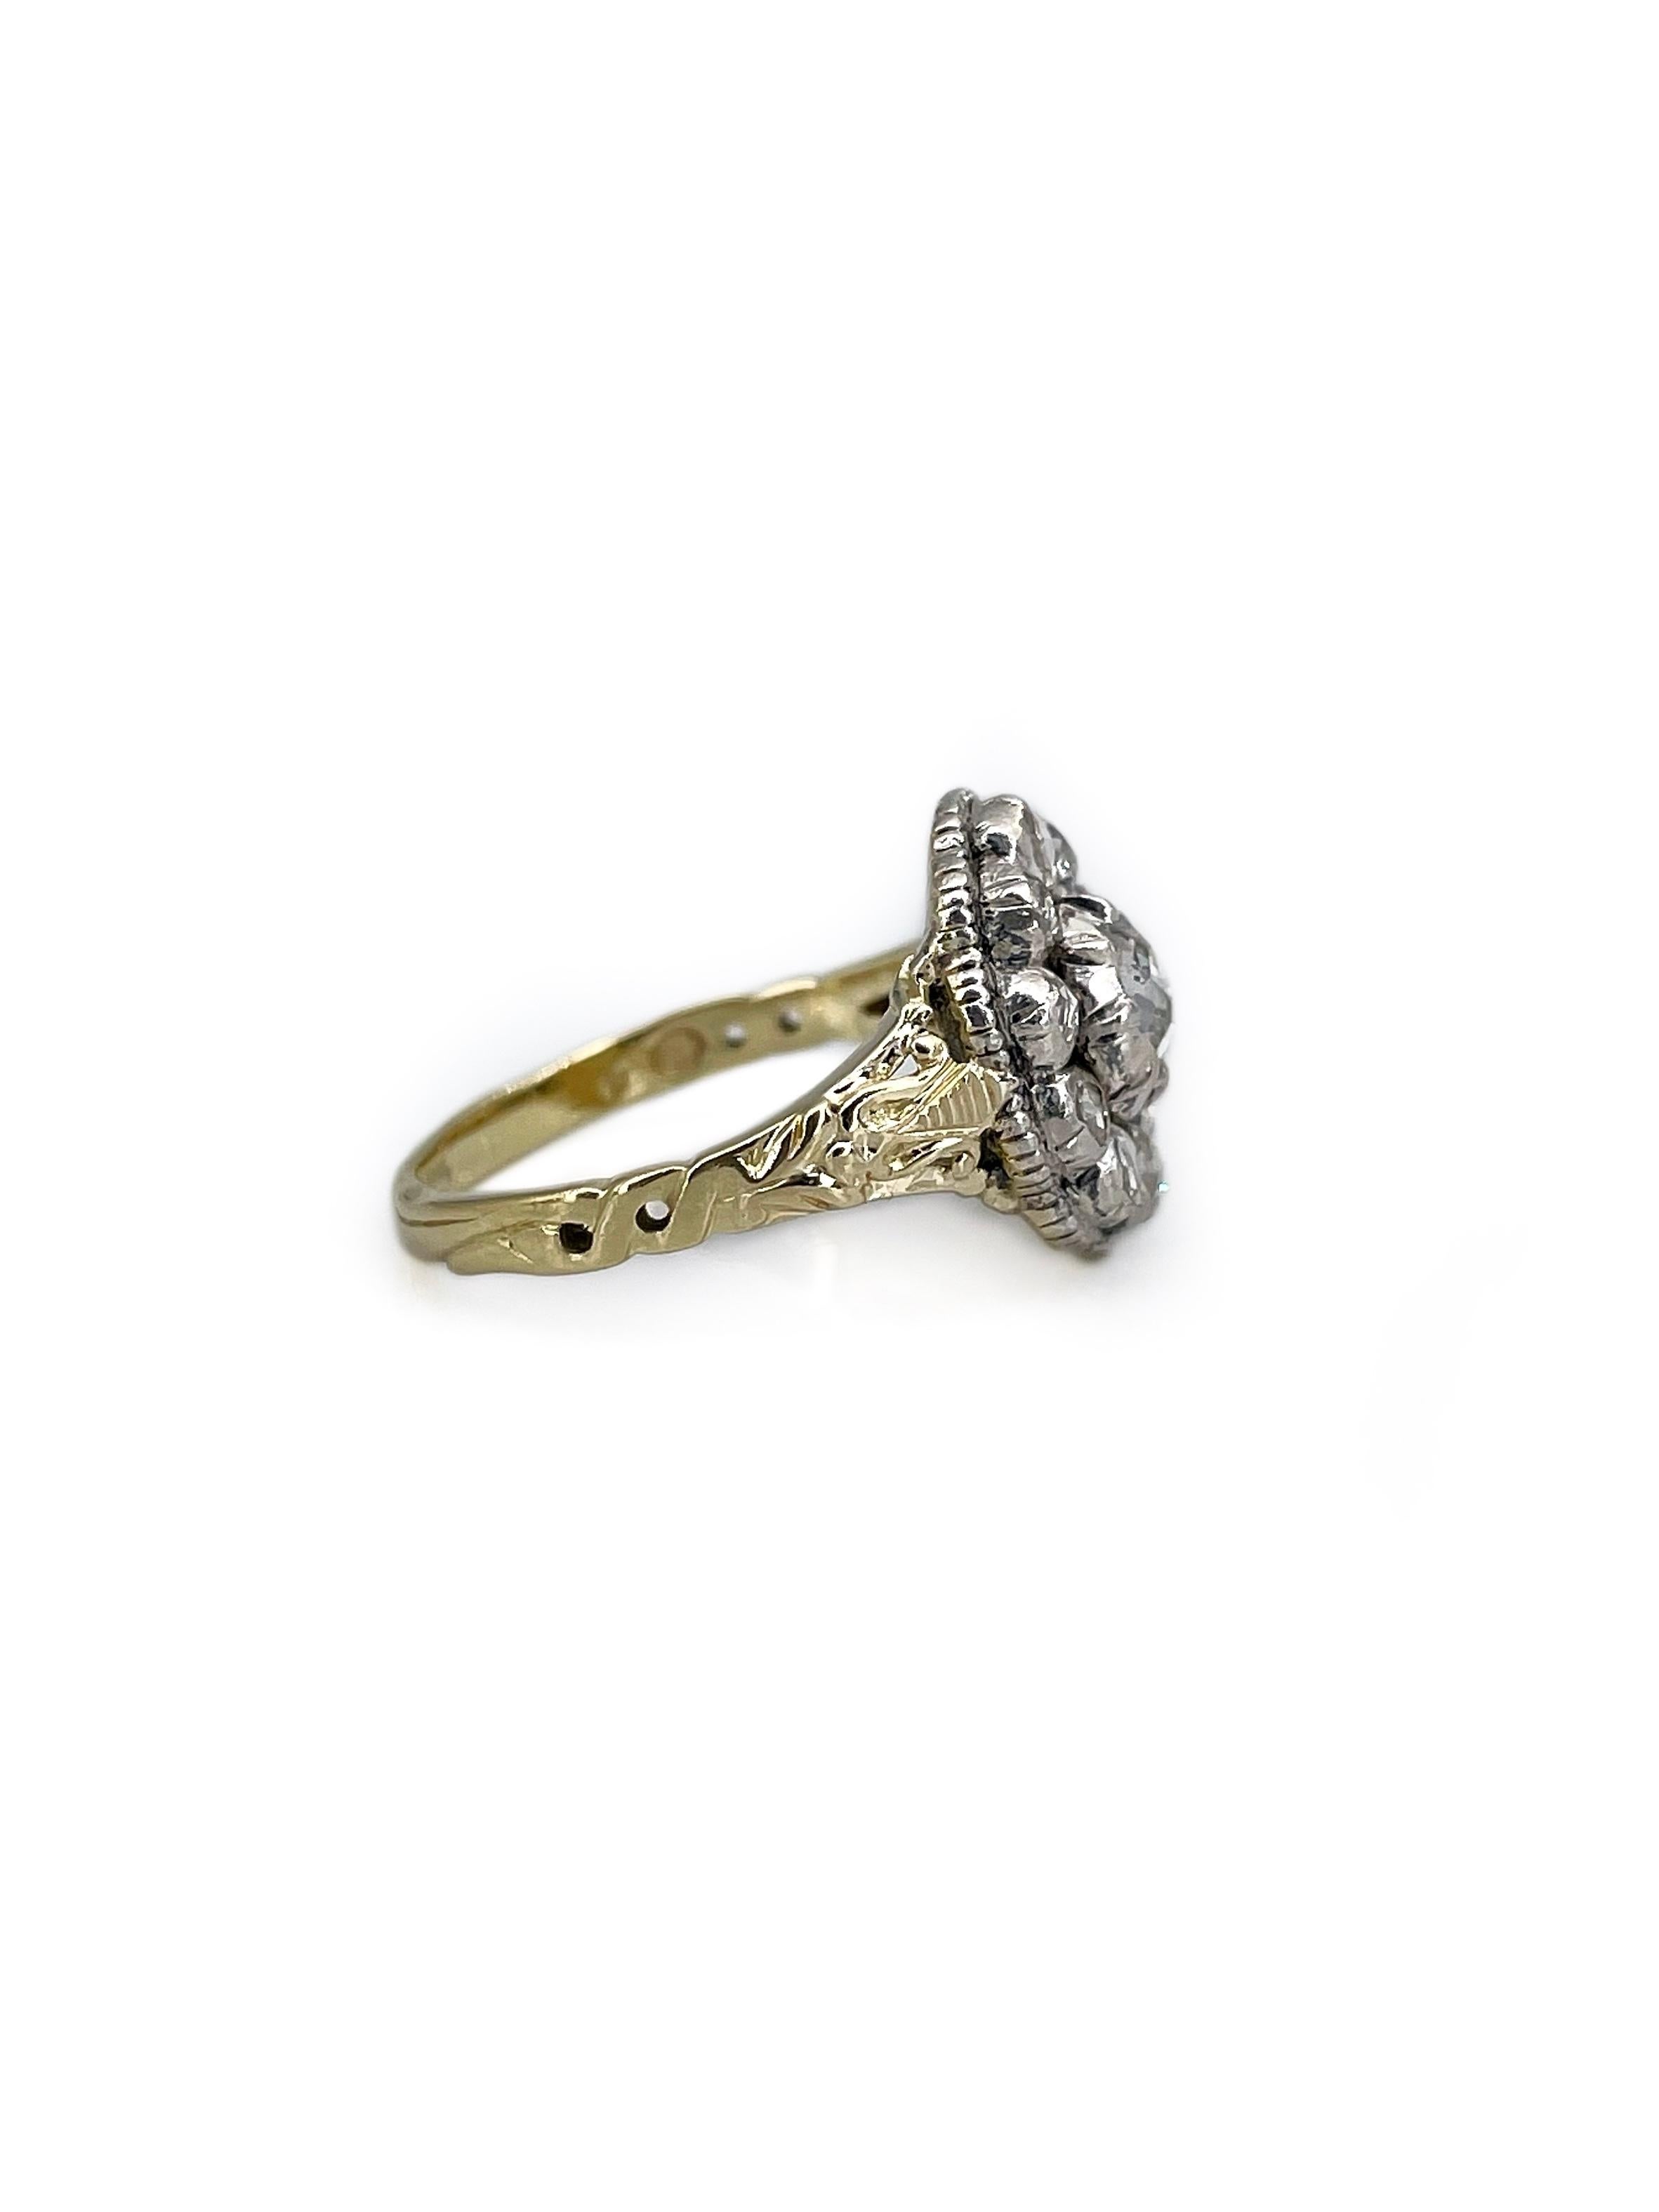 It is an amazing Victorian cluster ring crafted in 18K slightly yellow gold and adorned with silver. The piece features 11 rose cut diamonds. 

Back is closed. 

The shank of the ring has beautiful engravings. 

Weight: 4.14g
Size: 16.25 (US